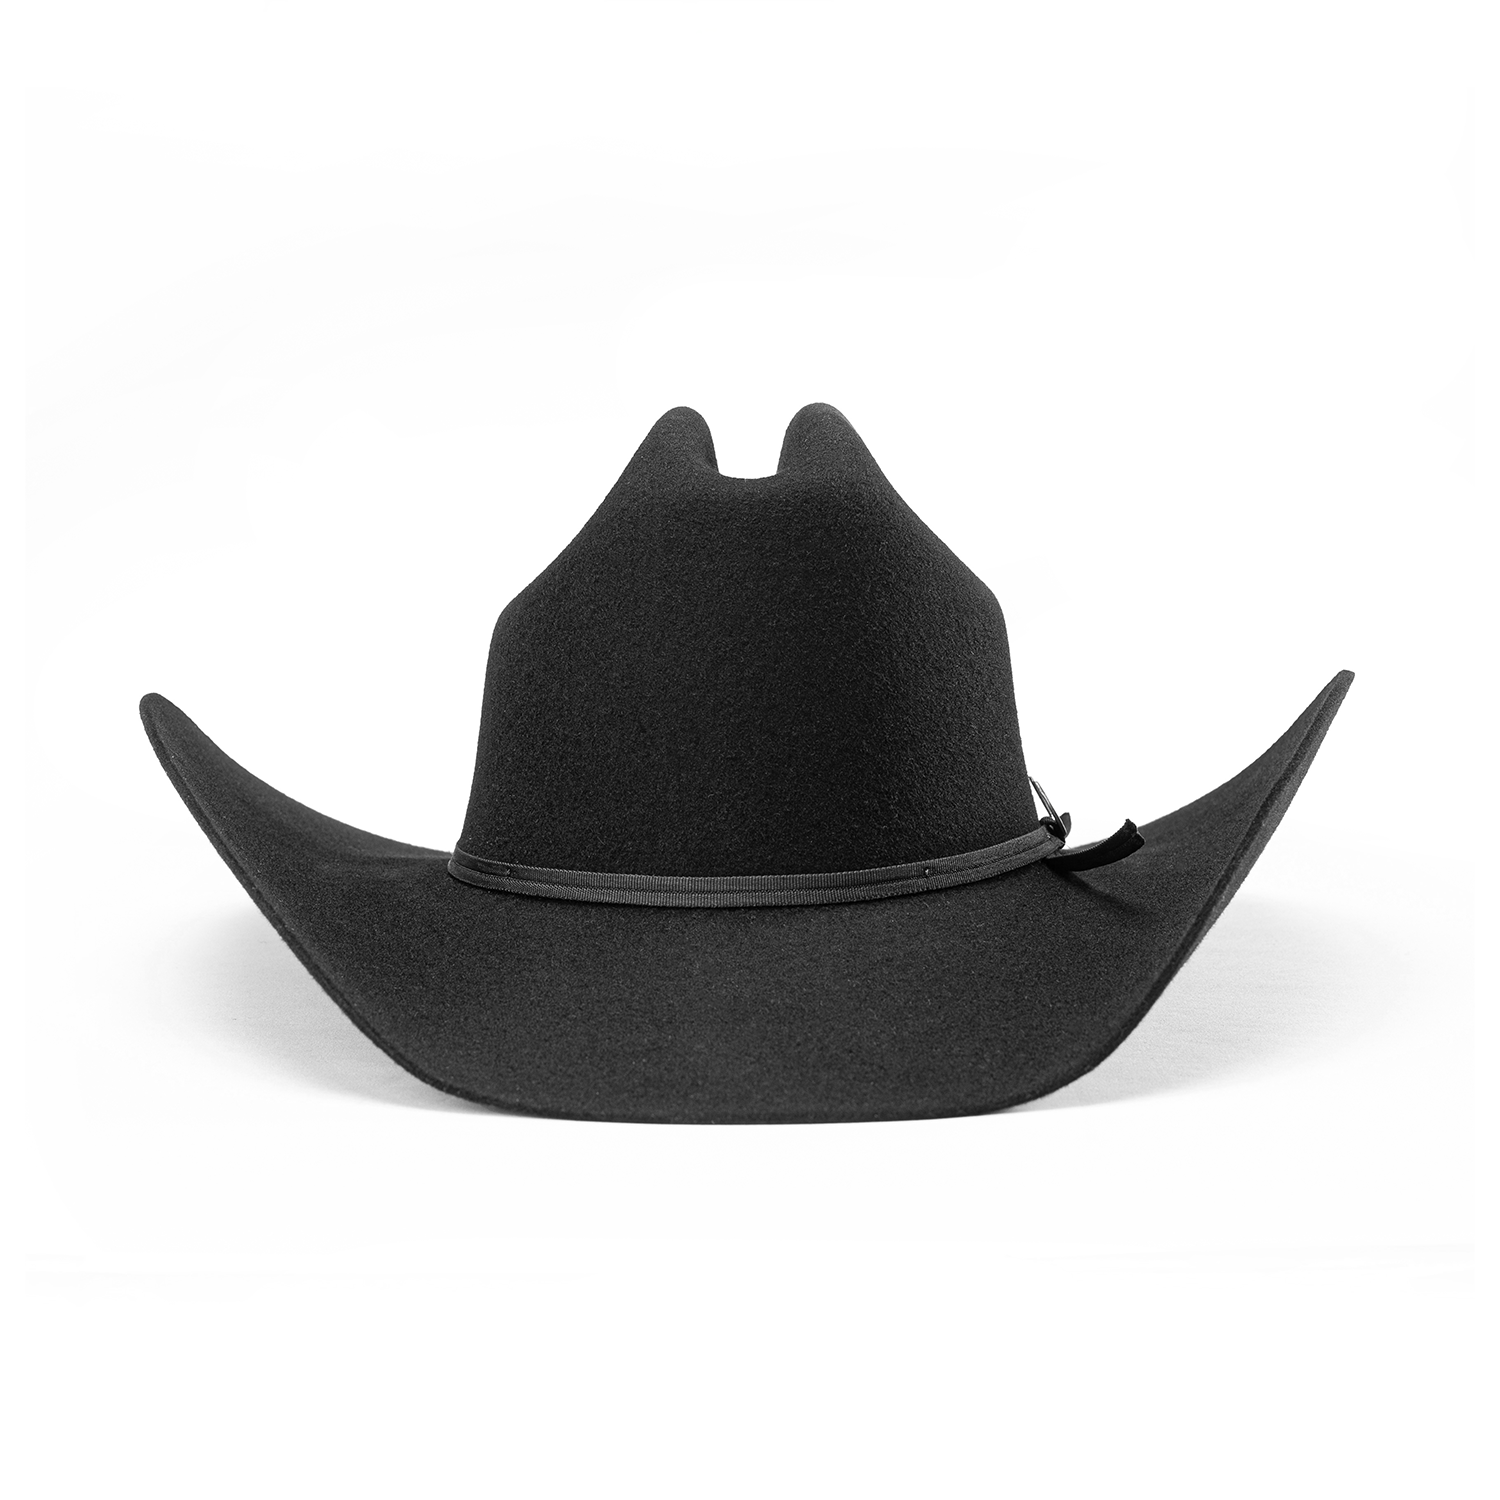 Longhorn 4X Hat Black - Cowboy Felt 4 1/2 Cattleman Crown 3 Brim with Western Flange Made in USA Seager Co, 7